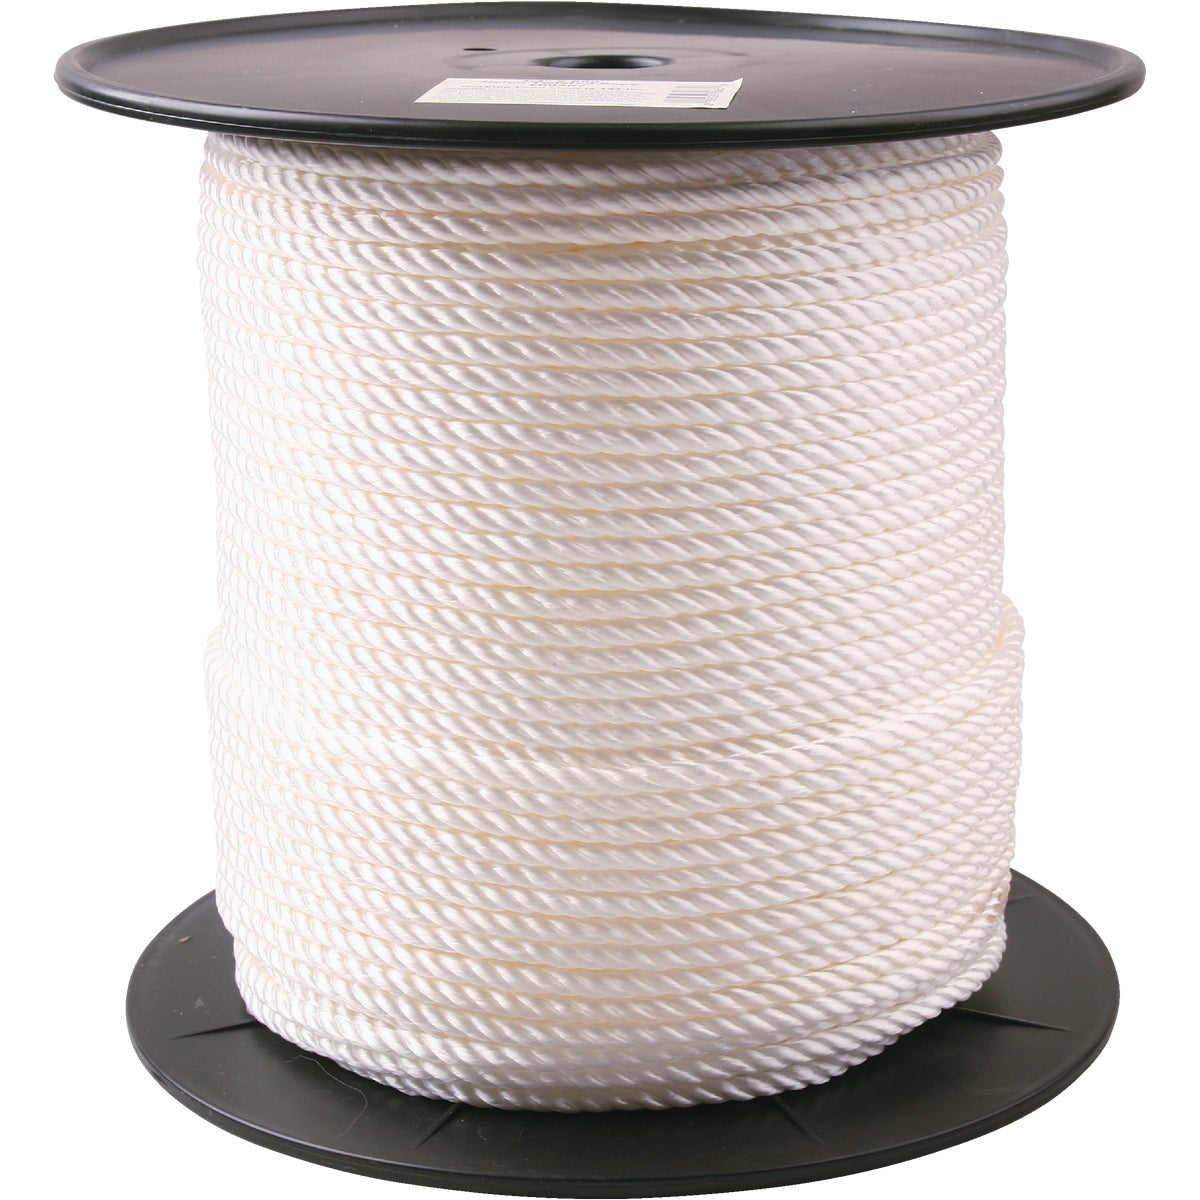 Item 700487, Twisted nylon rope made with super strength nylon, providing a long life.